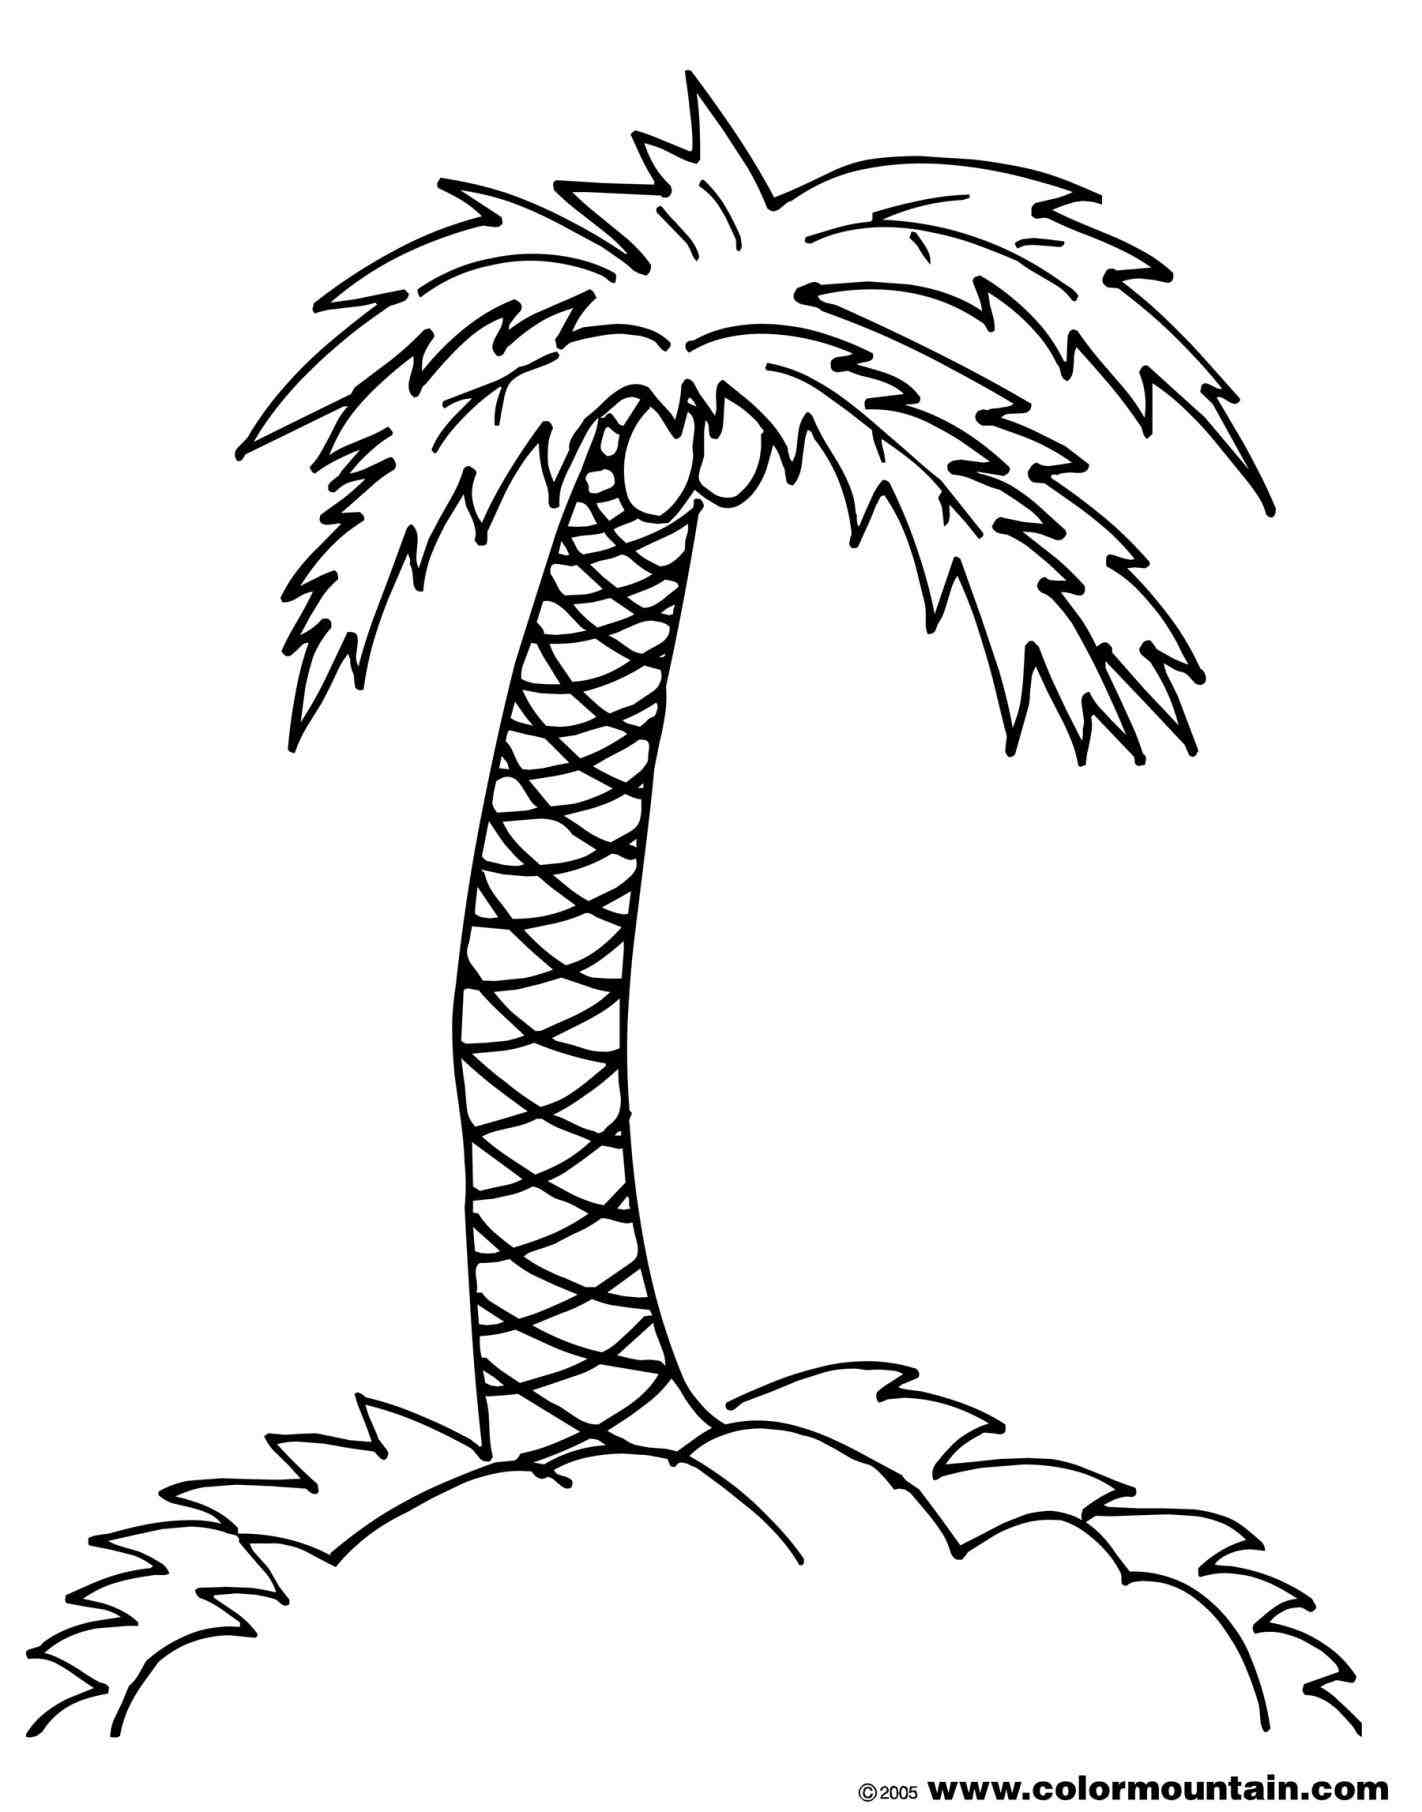 Palm Tree Branches Coloring Pages - High Quality Coloring Pages